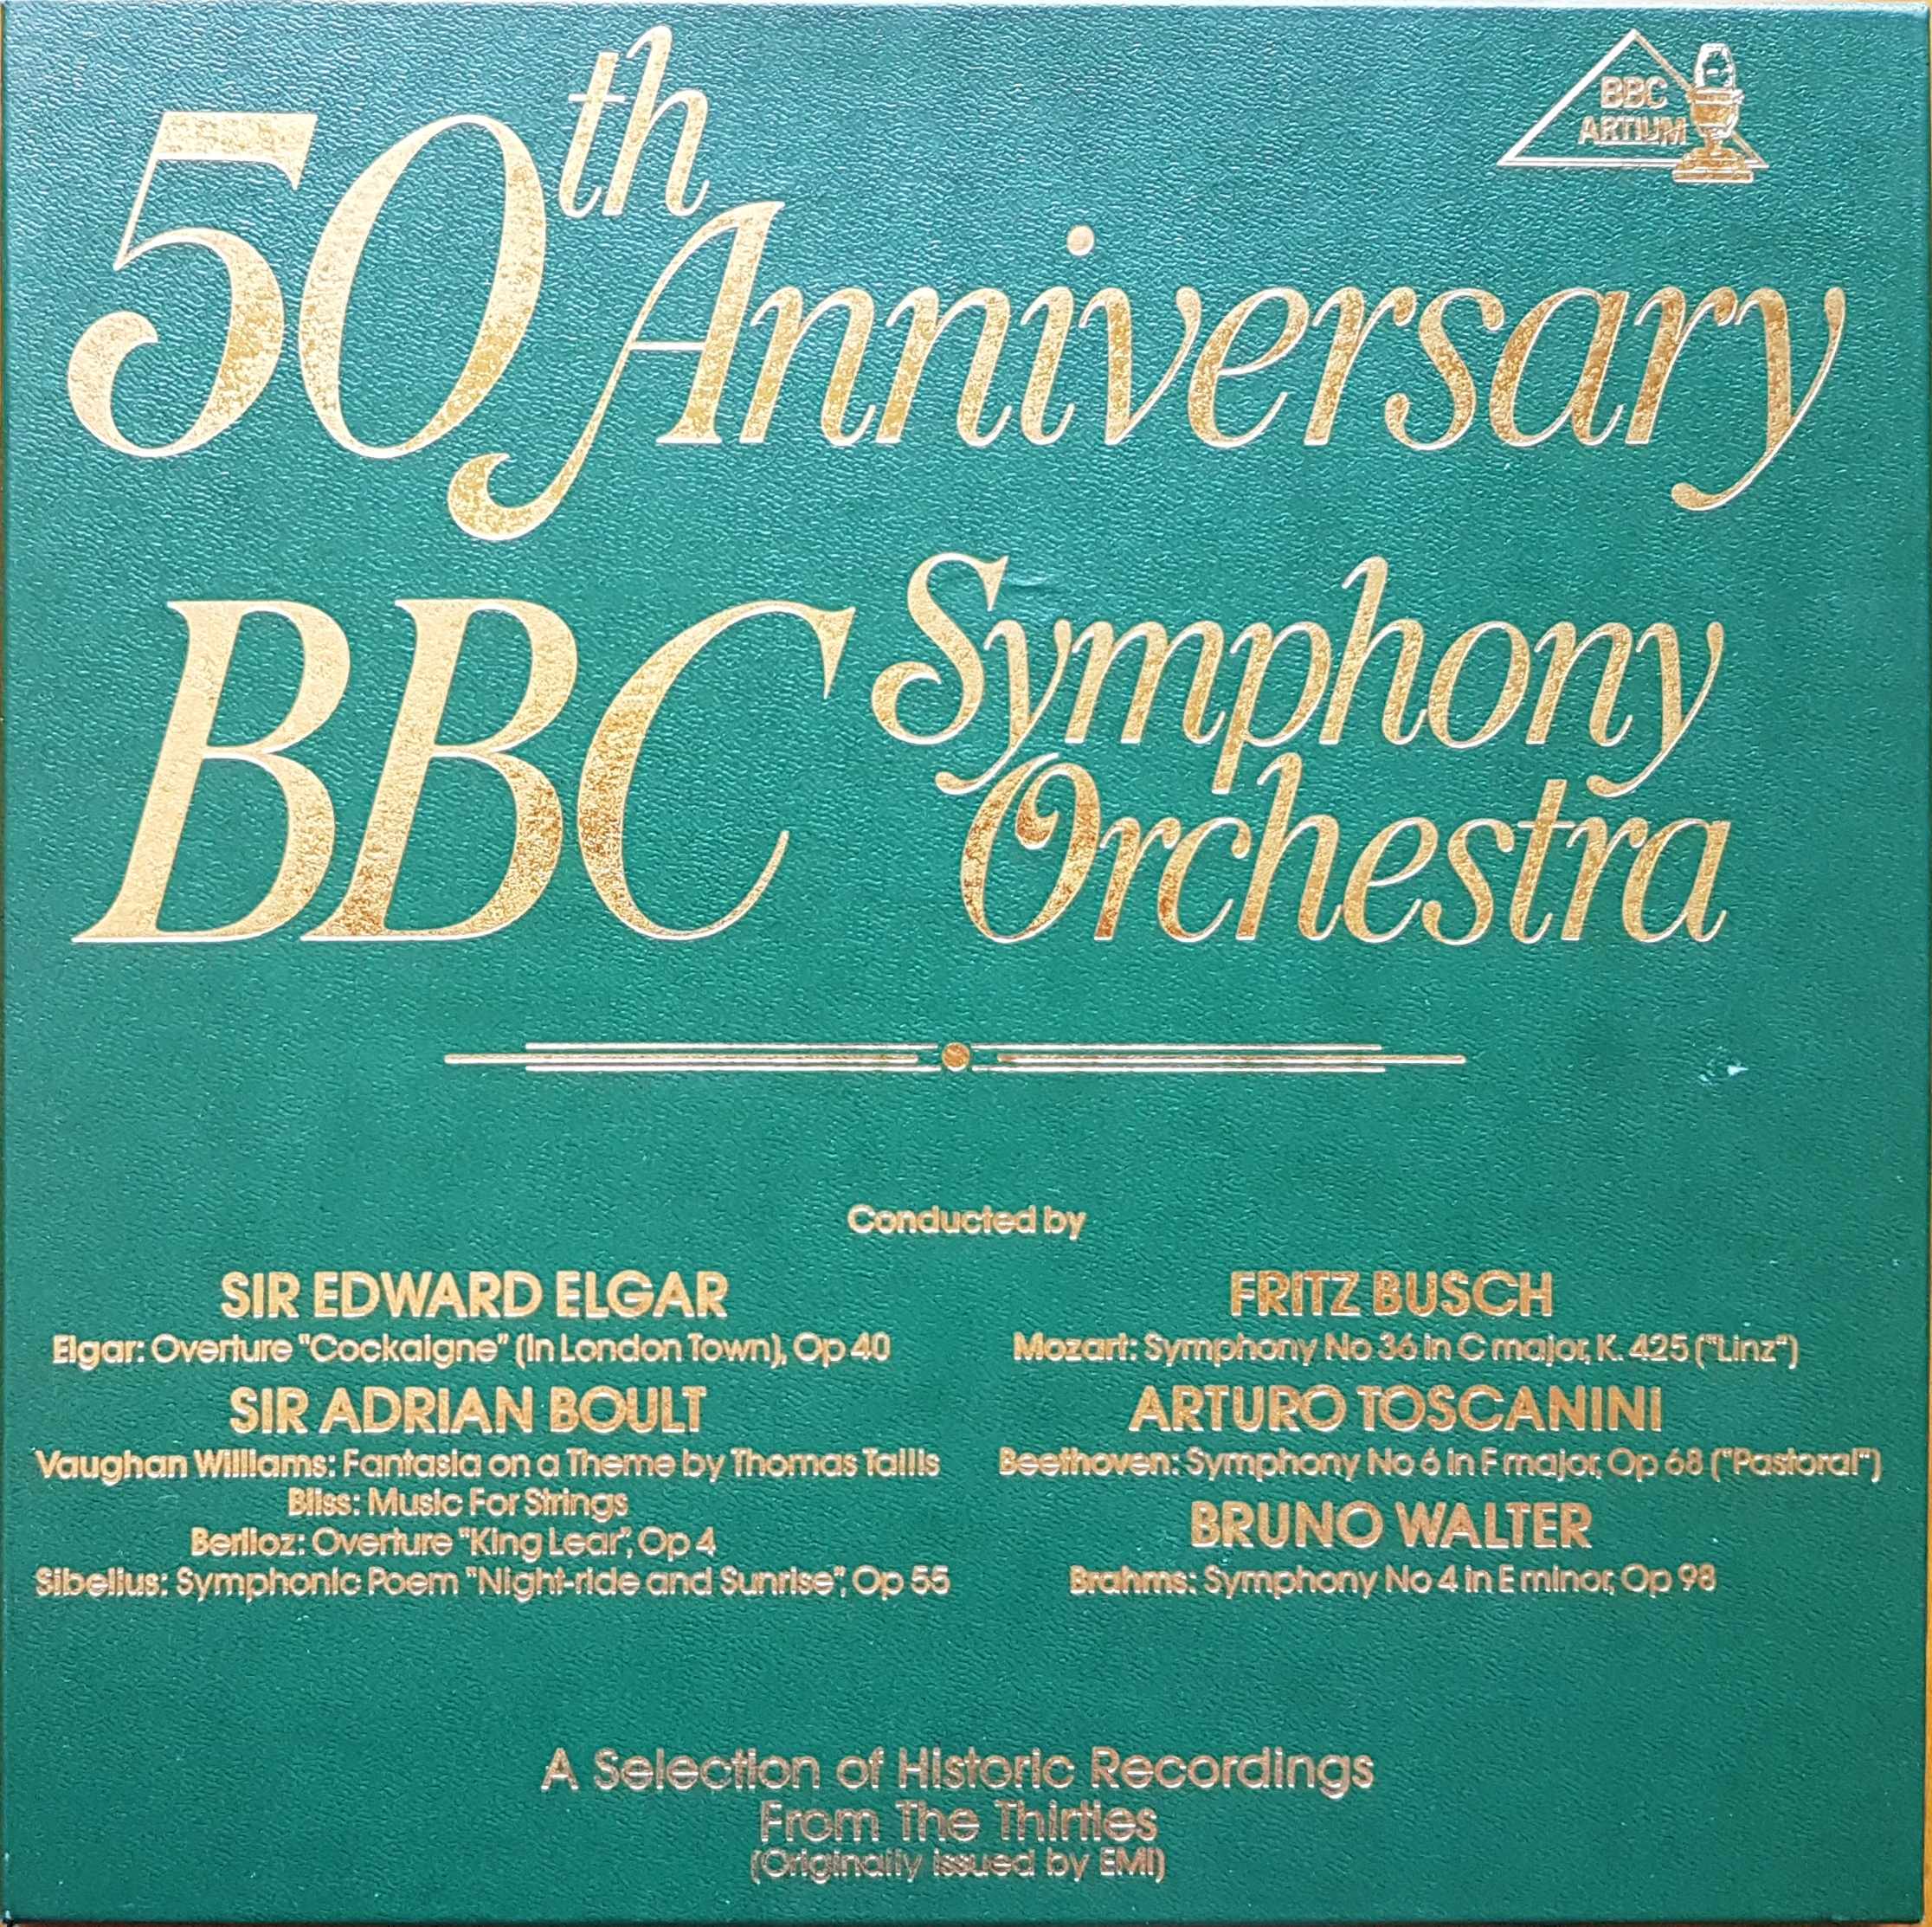 Picture of BBC 4001 The BBC symphony orchestra 50th anniversary by artist Elgar / Vaughan Williams / Bliss / Berlioz / Sibelius / Mozart / Brahms / Beethoven from the BBC albums - Records and Tapes library